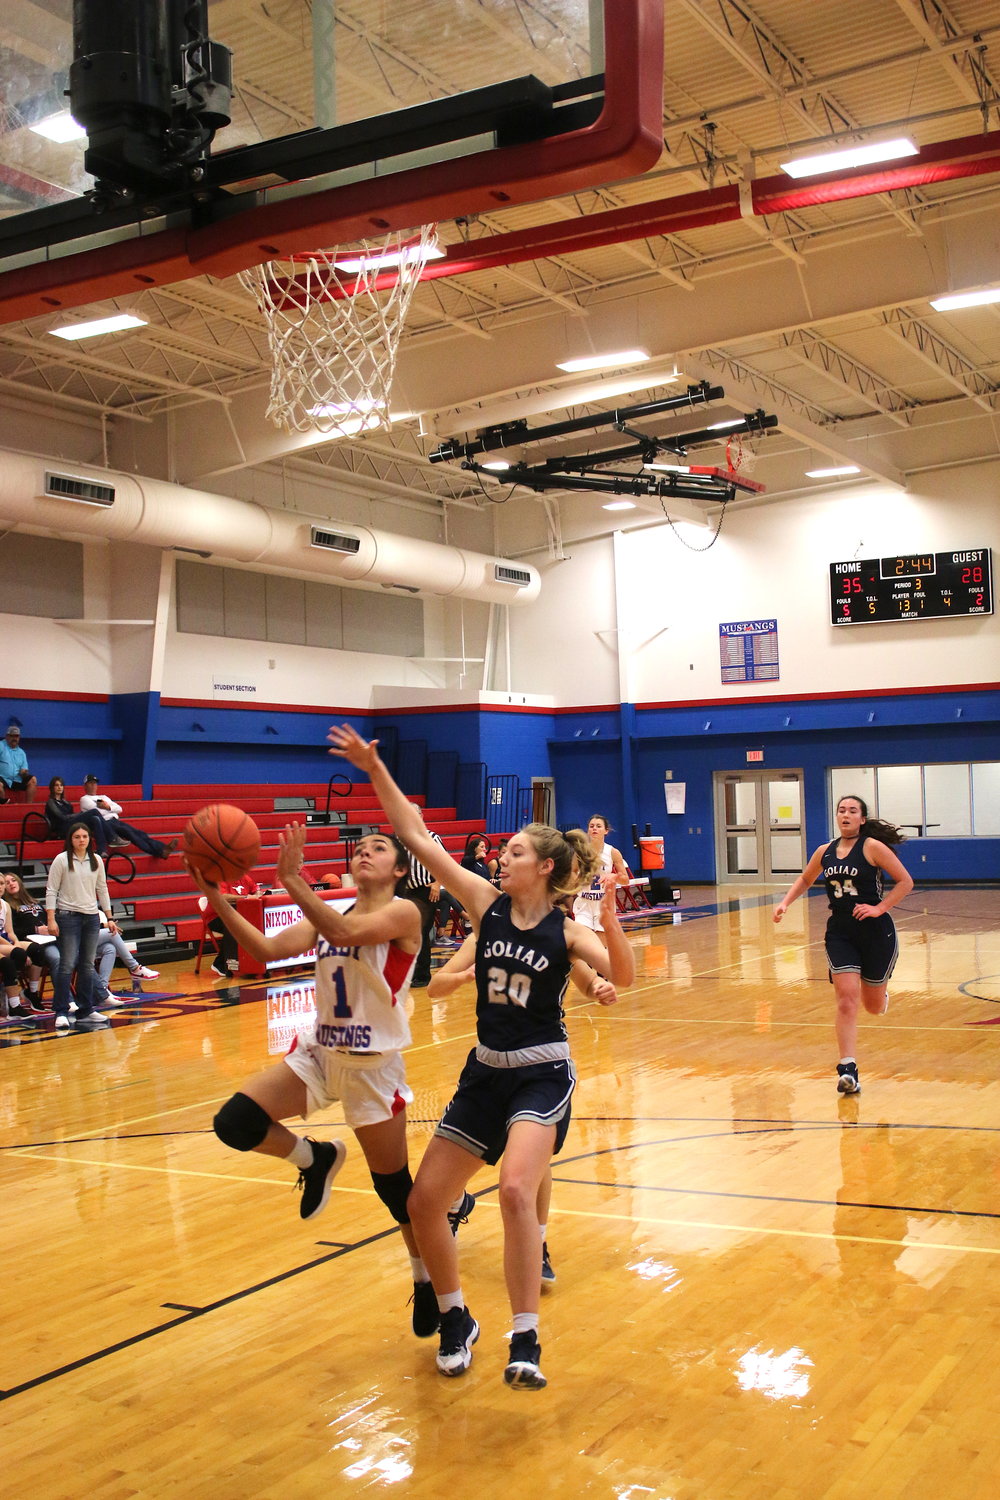 Mady Velasquez makes a layup and gets the foul in the third period of the Lady Mustangs' 48-38 win over Goliad.